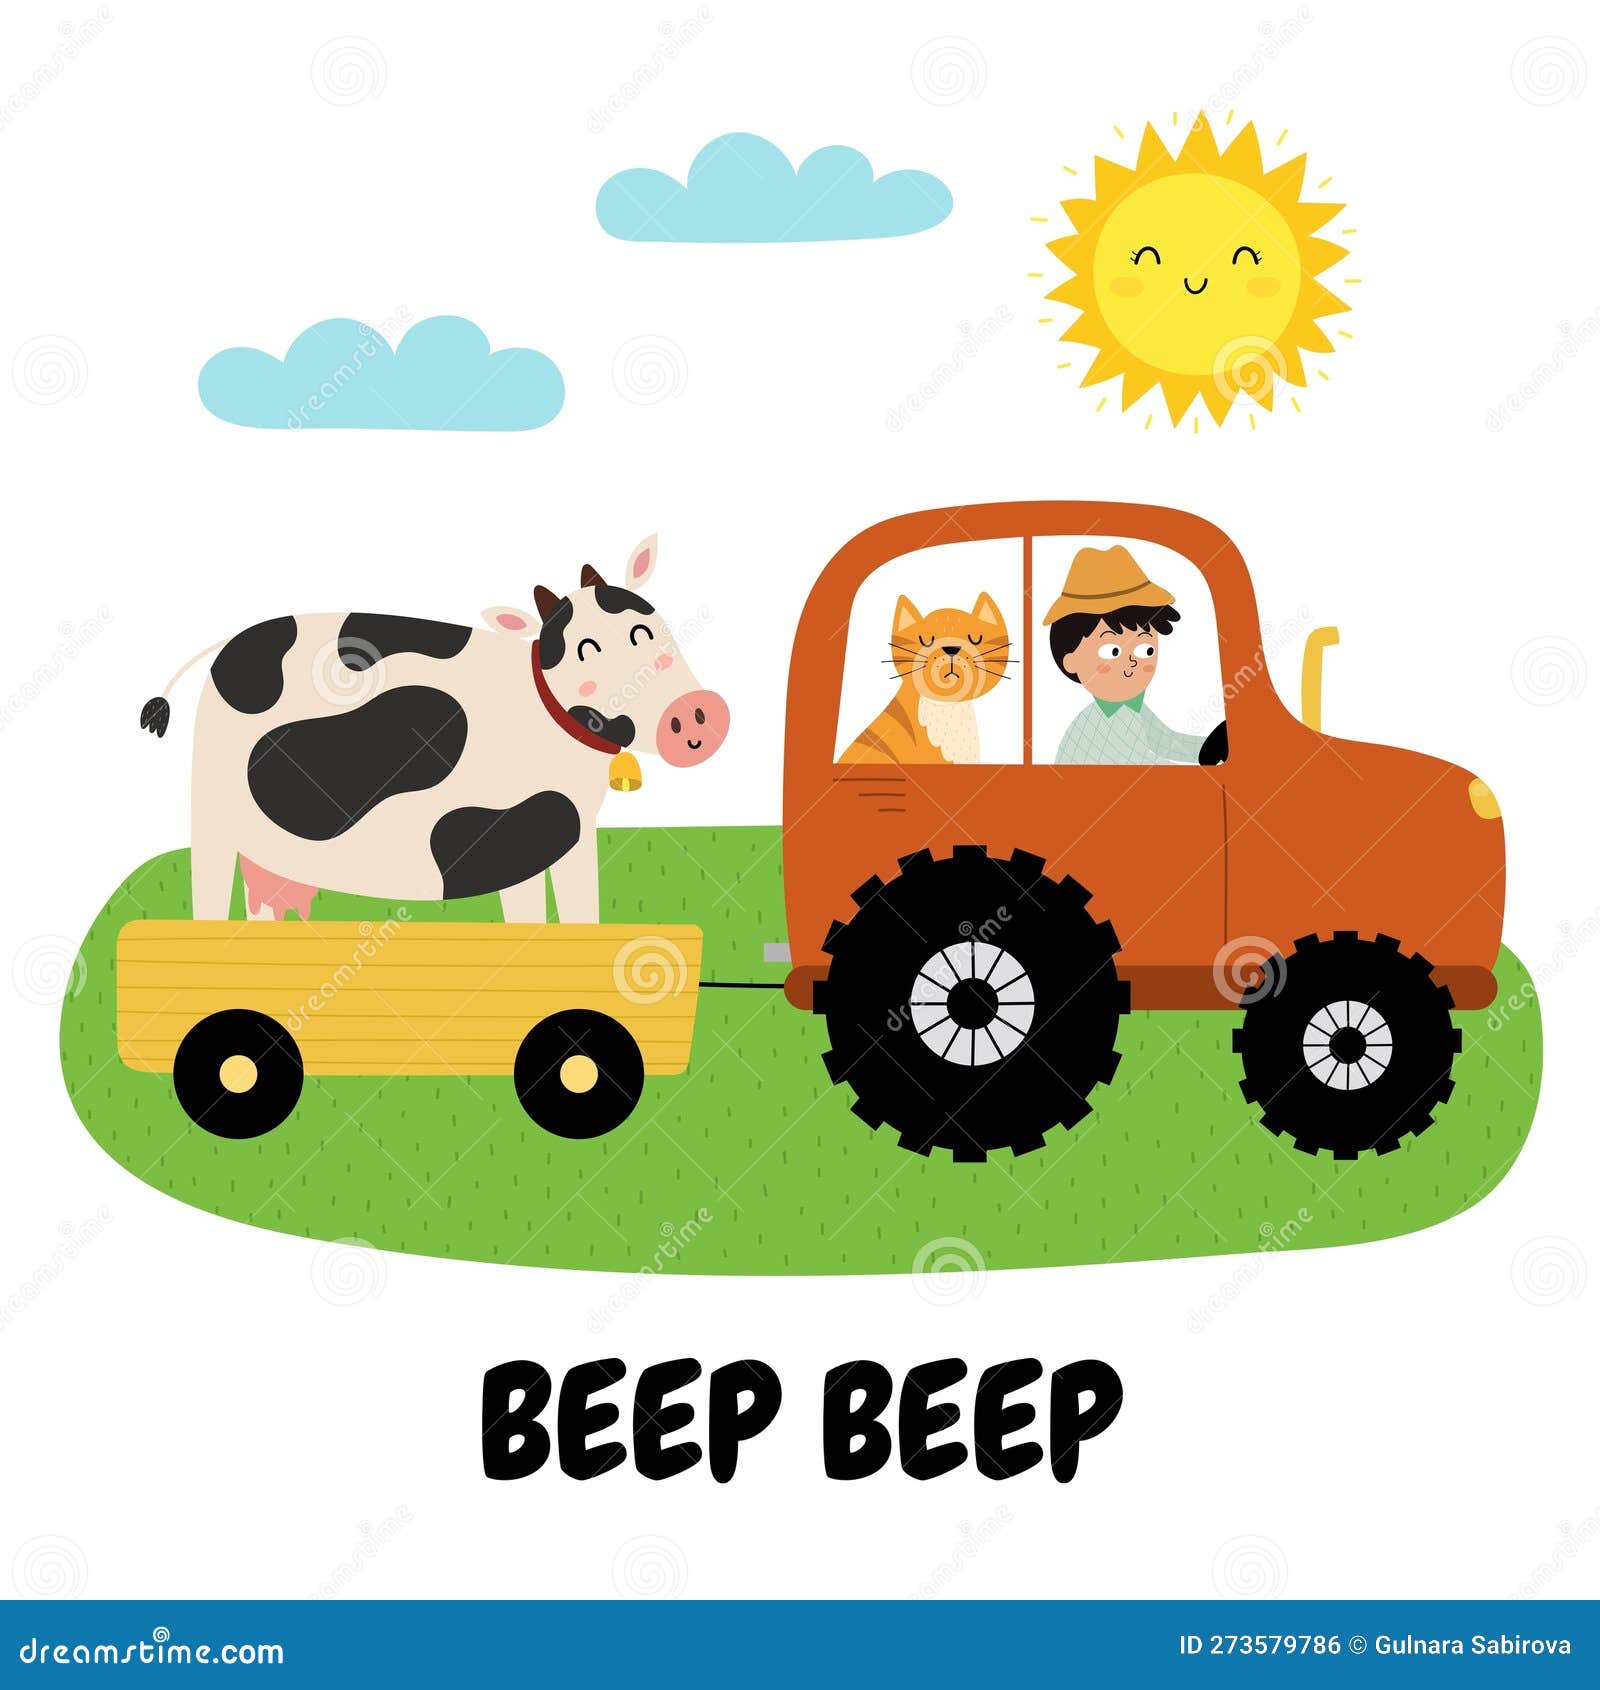 beep beep print with cute boy and cat on a tractor carrying a cow. summer green meadow